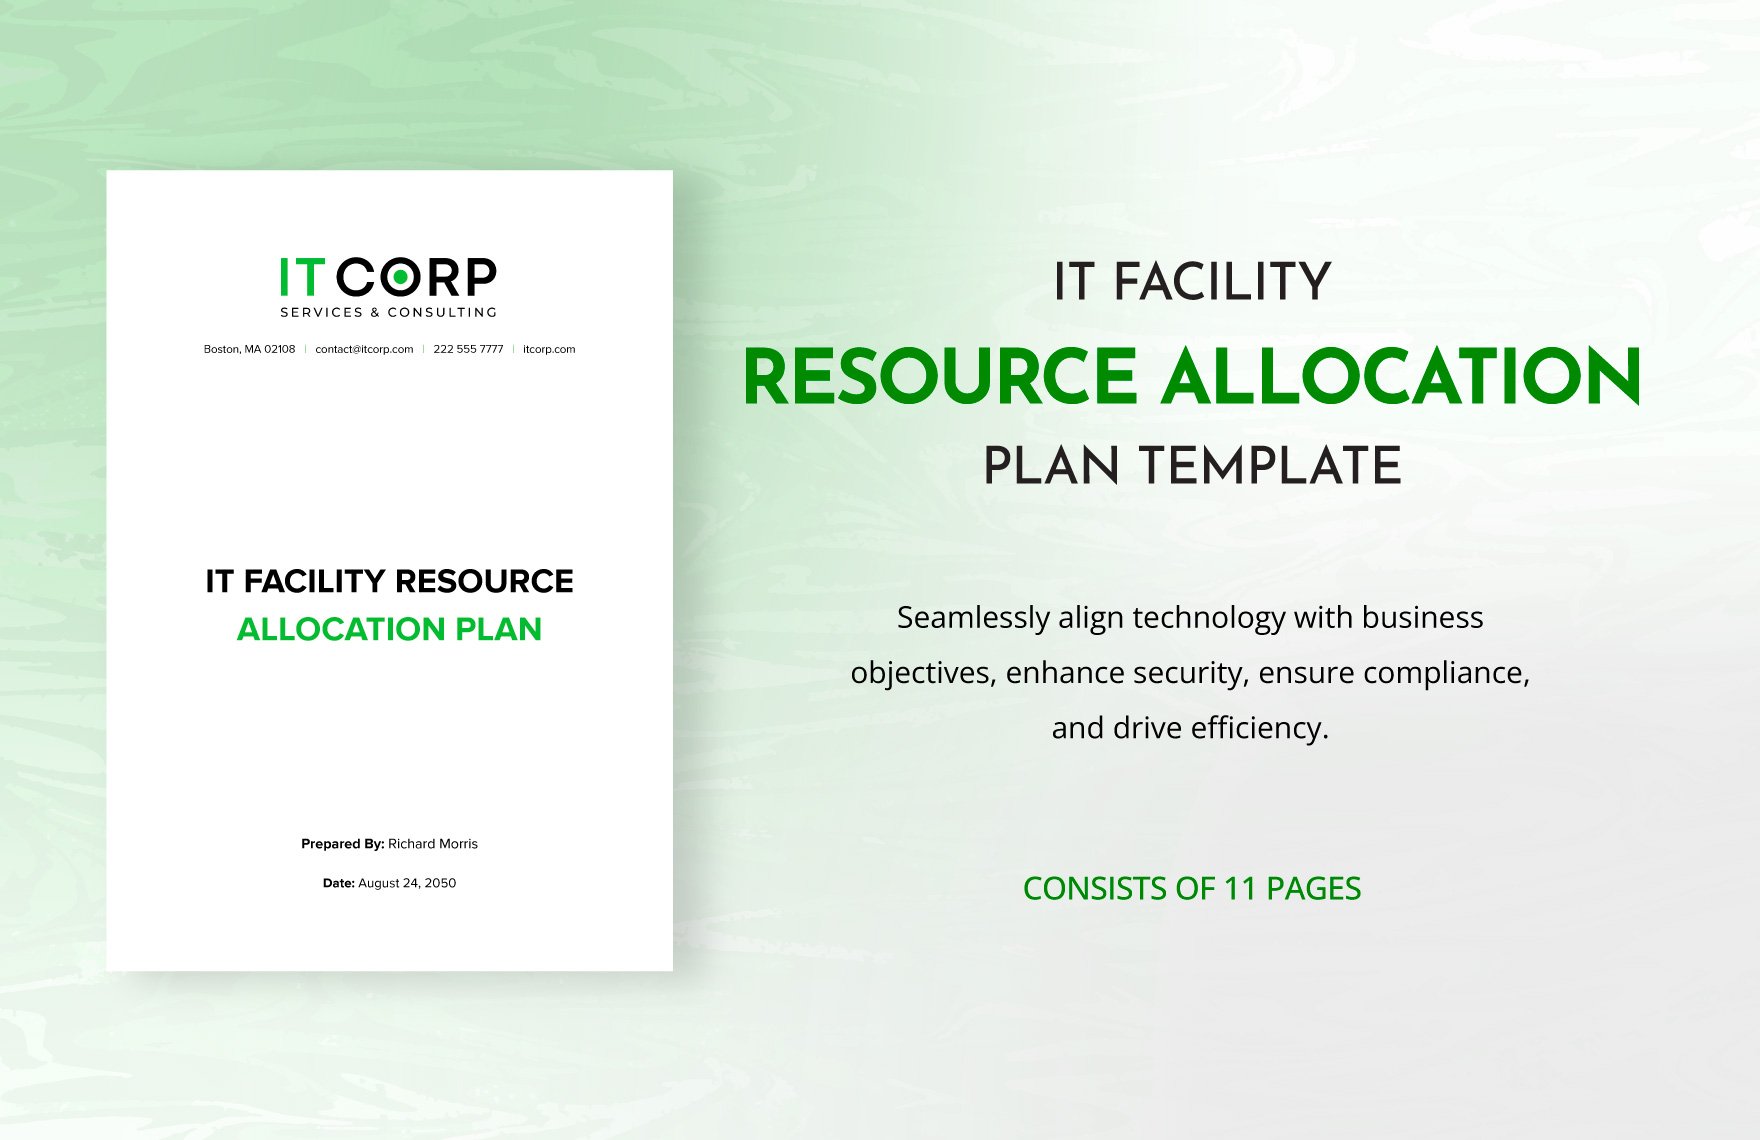 IT Facility Resource Allocation Plan Template